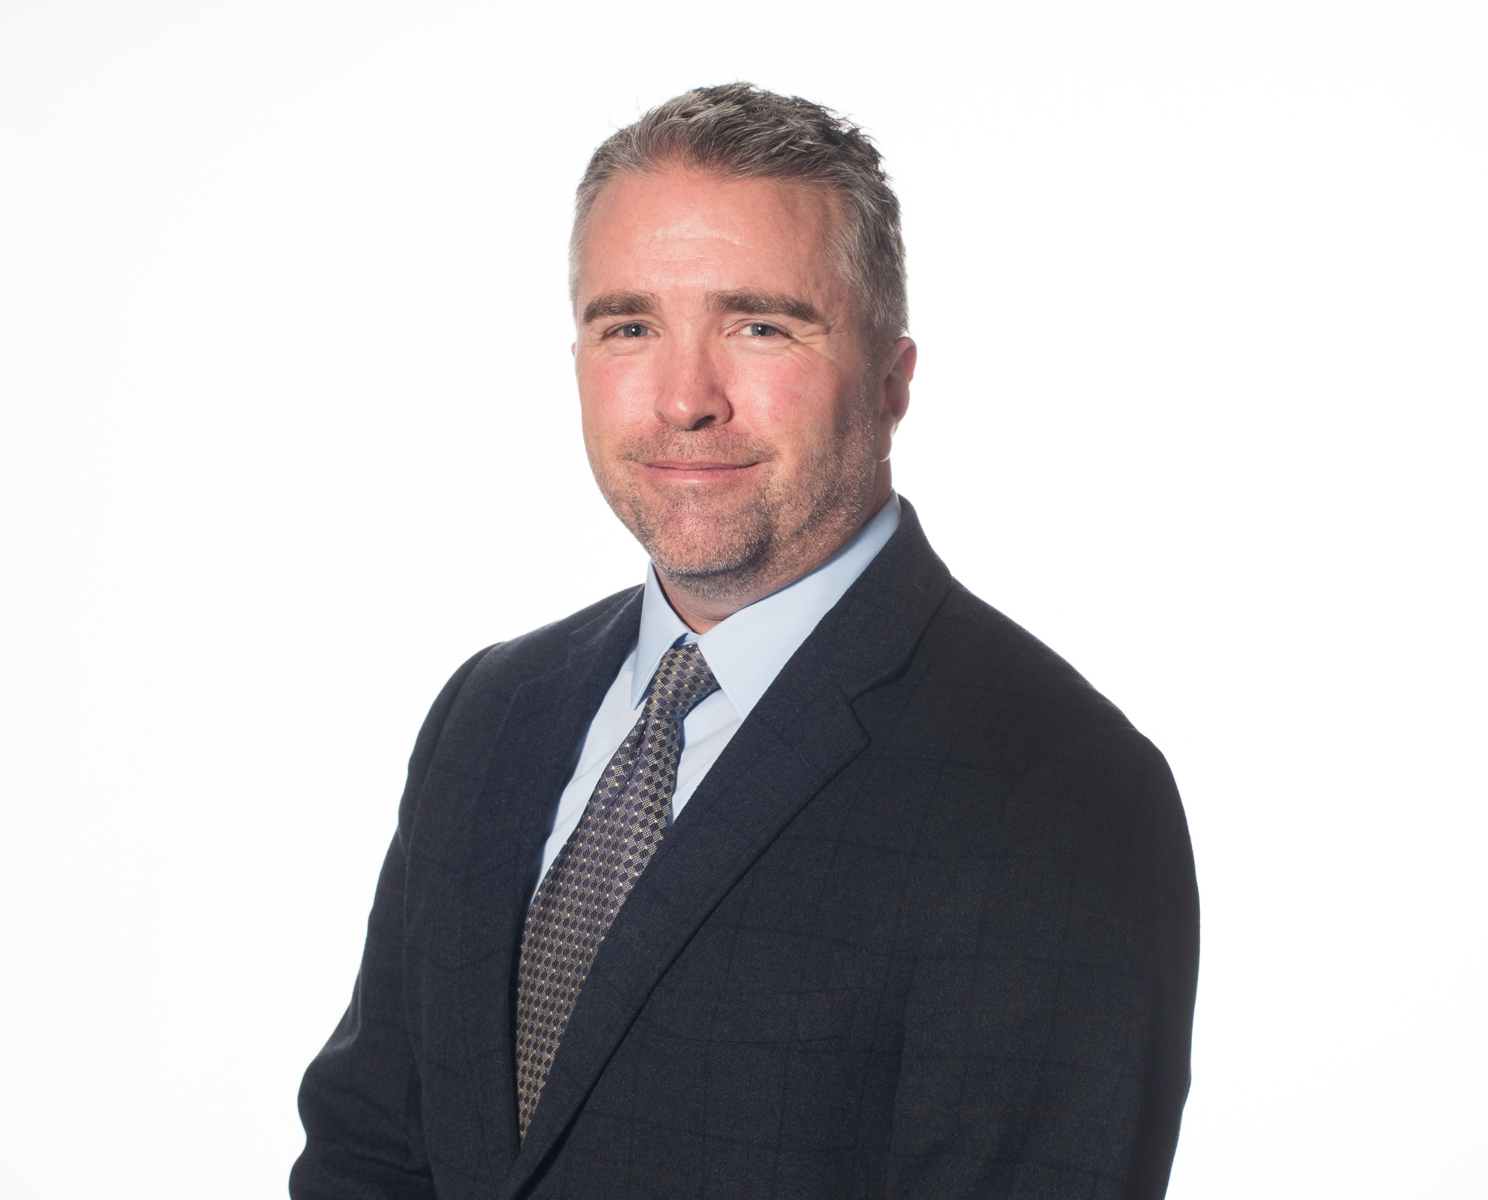 At-Bay Welcomes Jim Prendergast, Head of Product Compliance and Enablement